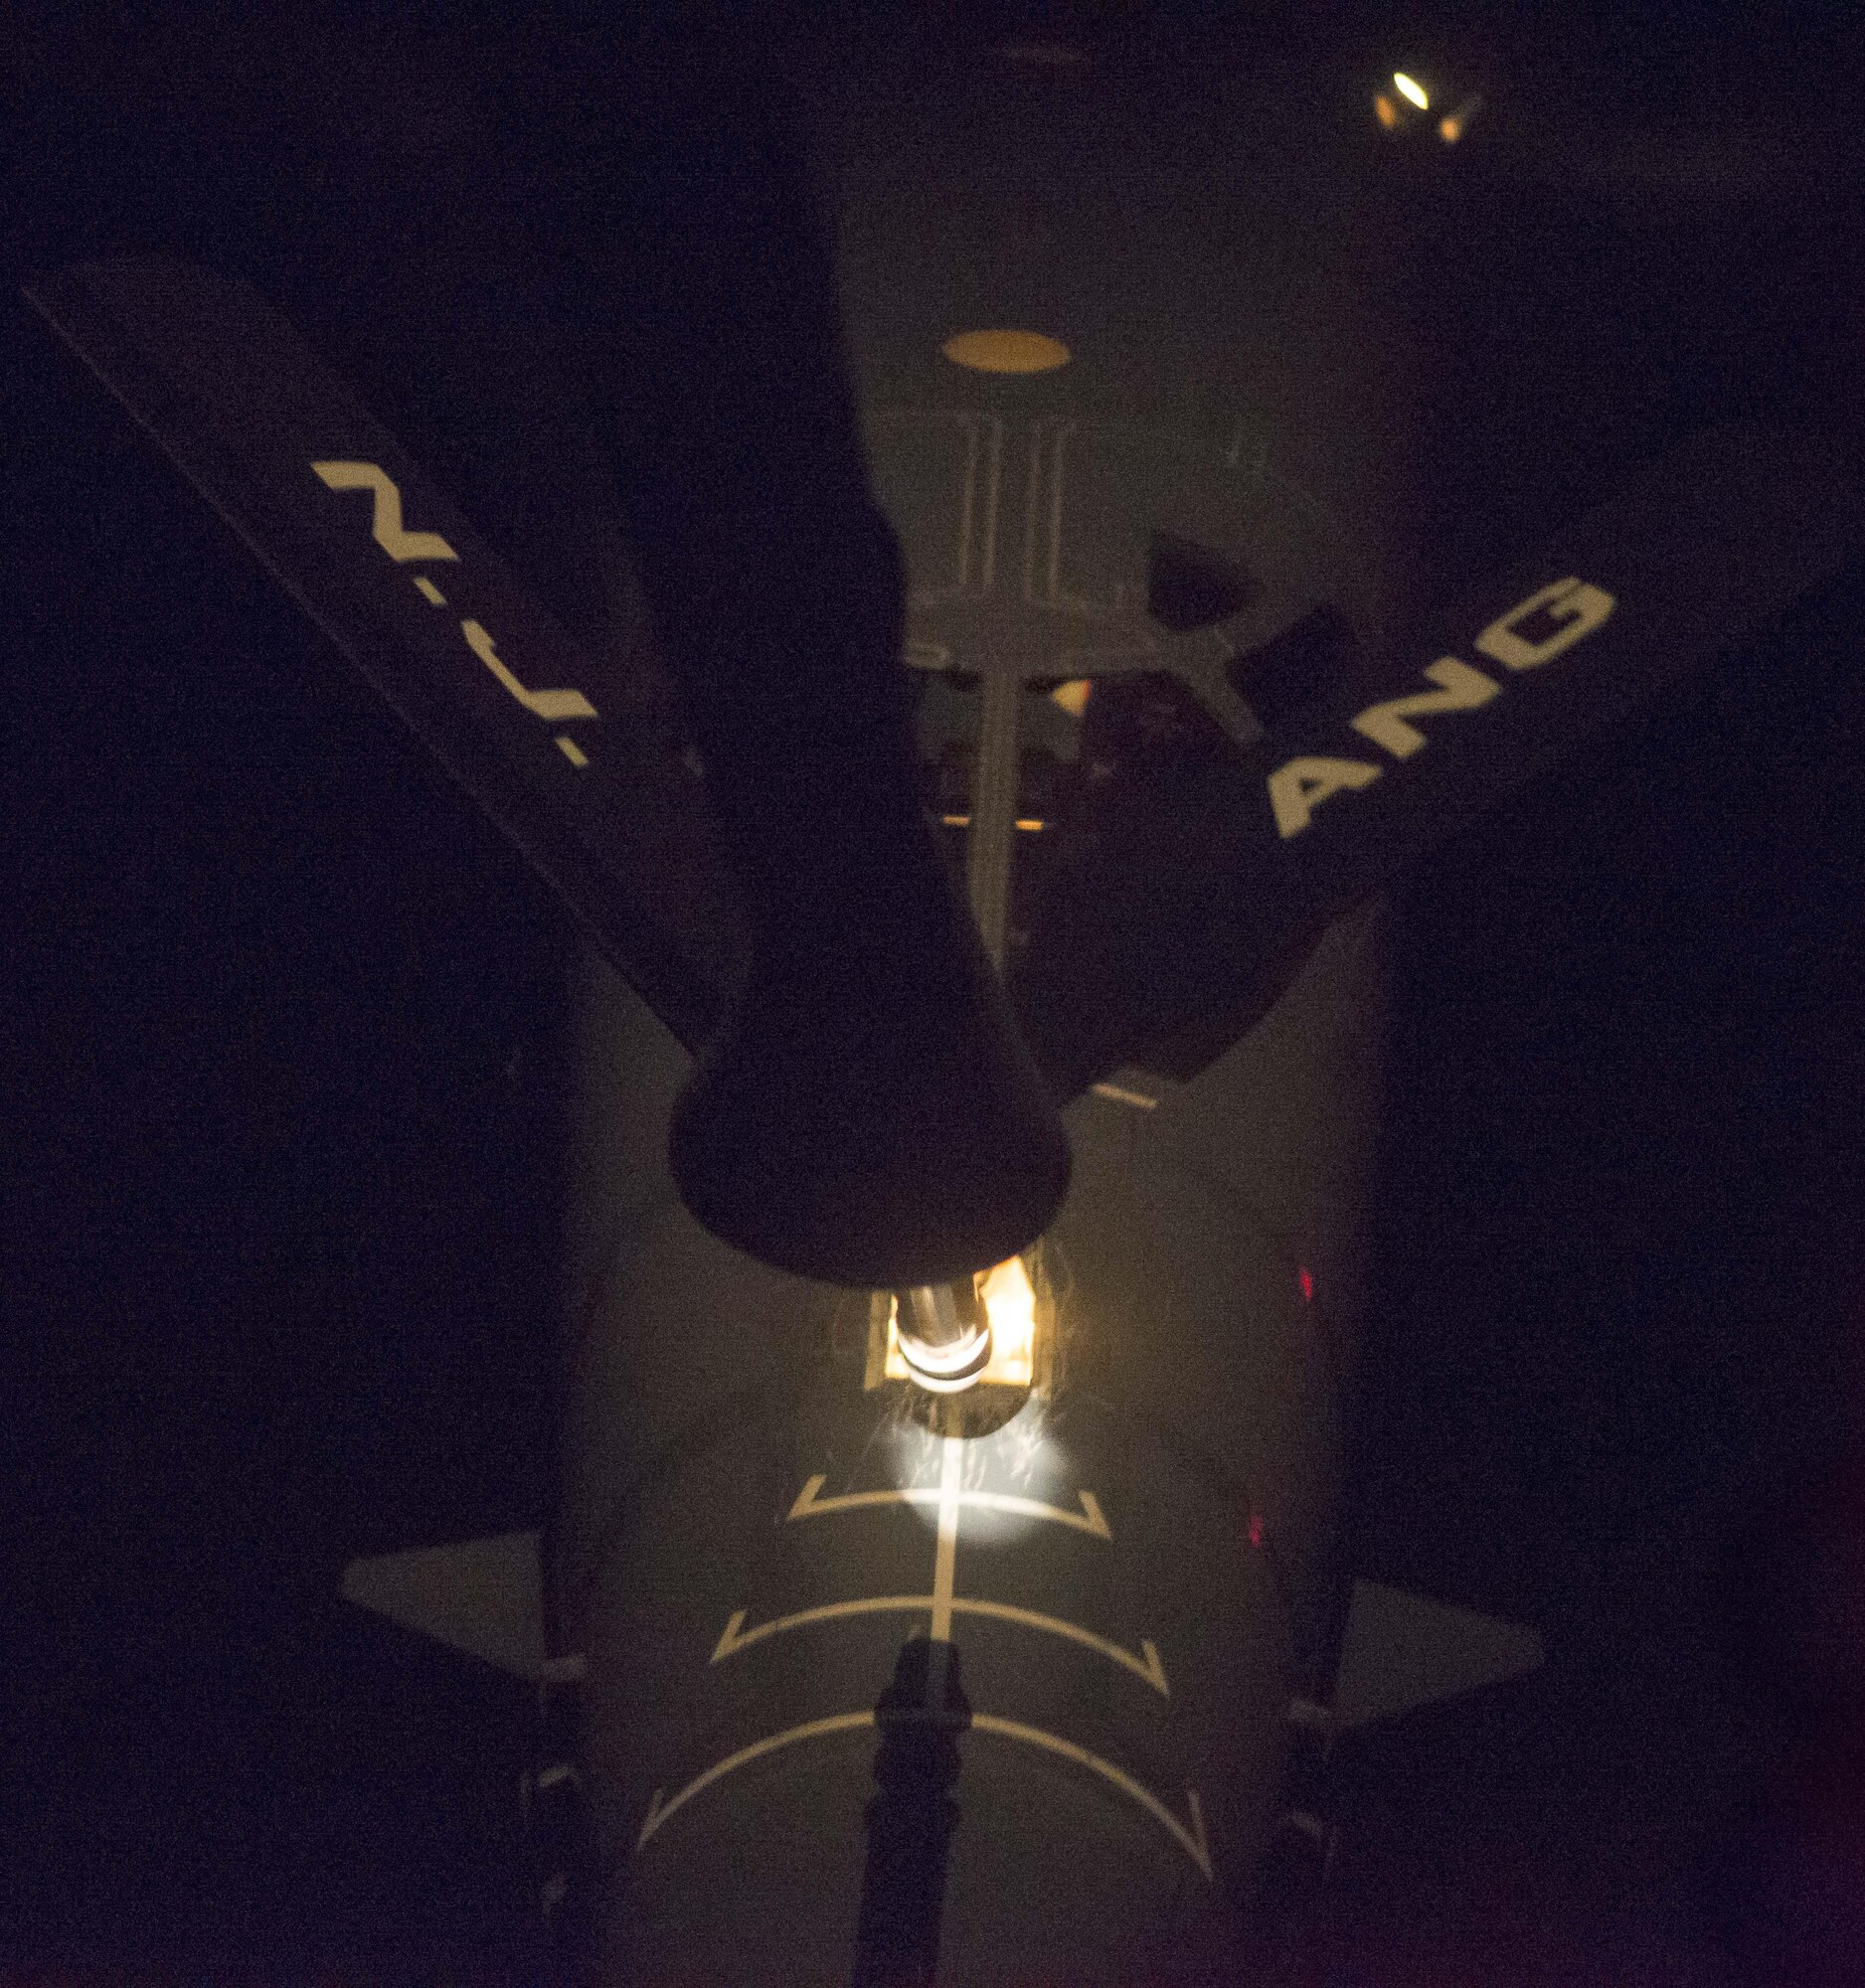 A U.S. Air Force B-1B Lancer, assigned to the 37th Expeditionary Bomb Squadron, deployed from Ellsworth Air Force Base, South Dakota, receives fuel from a U.S. Air Force KC-135 Stratotanker Sep. 23, 2017. This mission was flown as part of the continuing demonstration of the ironclad U.S. commitment to the defense of its homeland and in support of its allies and partners. (U.S. Air Force photo by Tech. Sgt. Richard P. Ebensberger/Released)